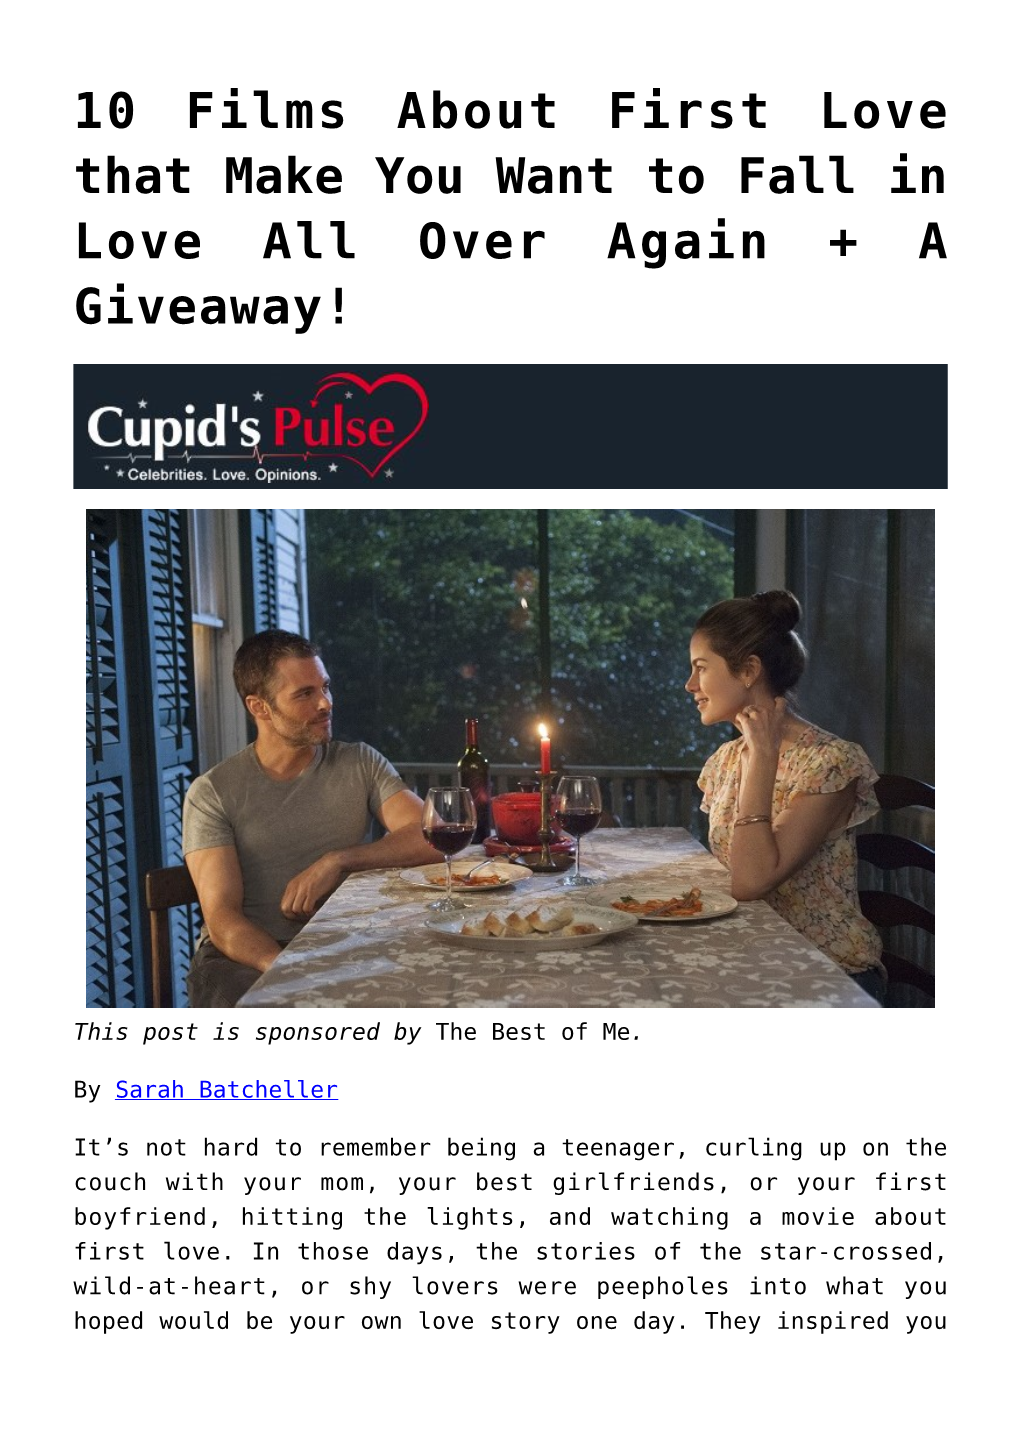 10 Films About First Love That Make You Want to Fall in Love All Over Again + a Giveaway!